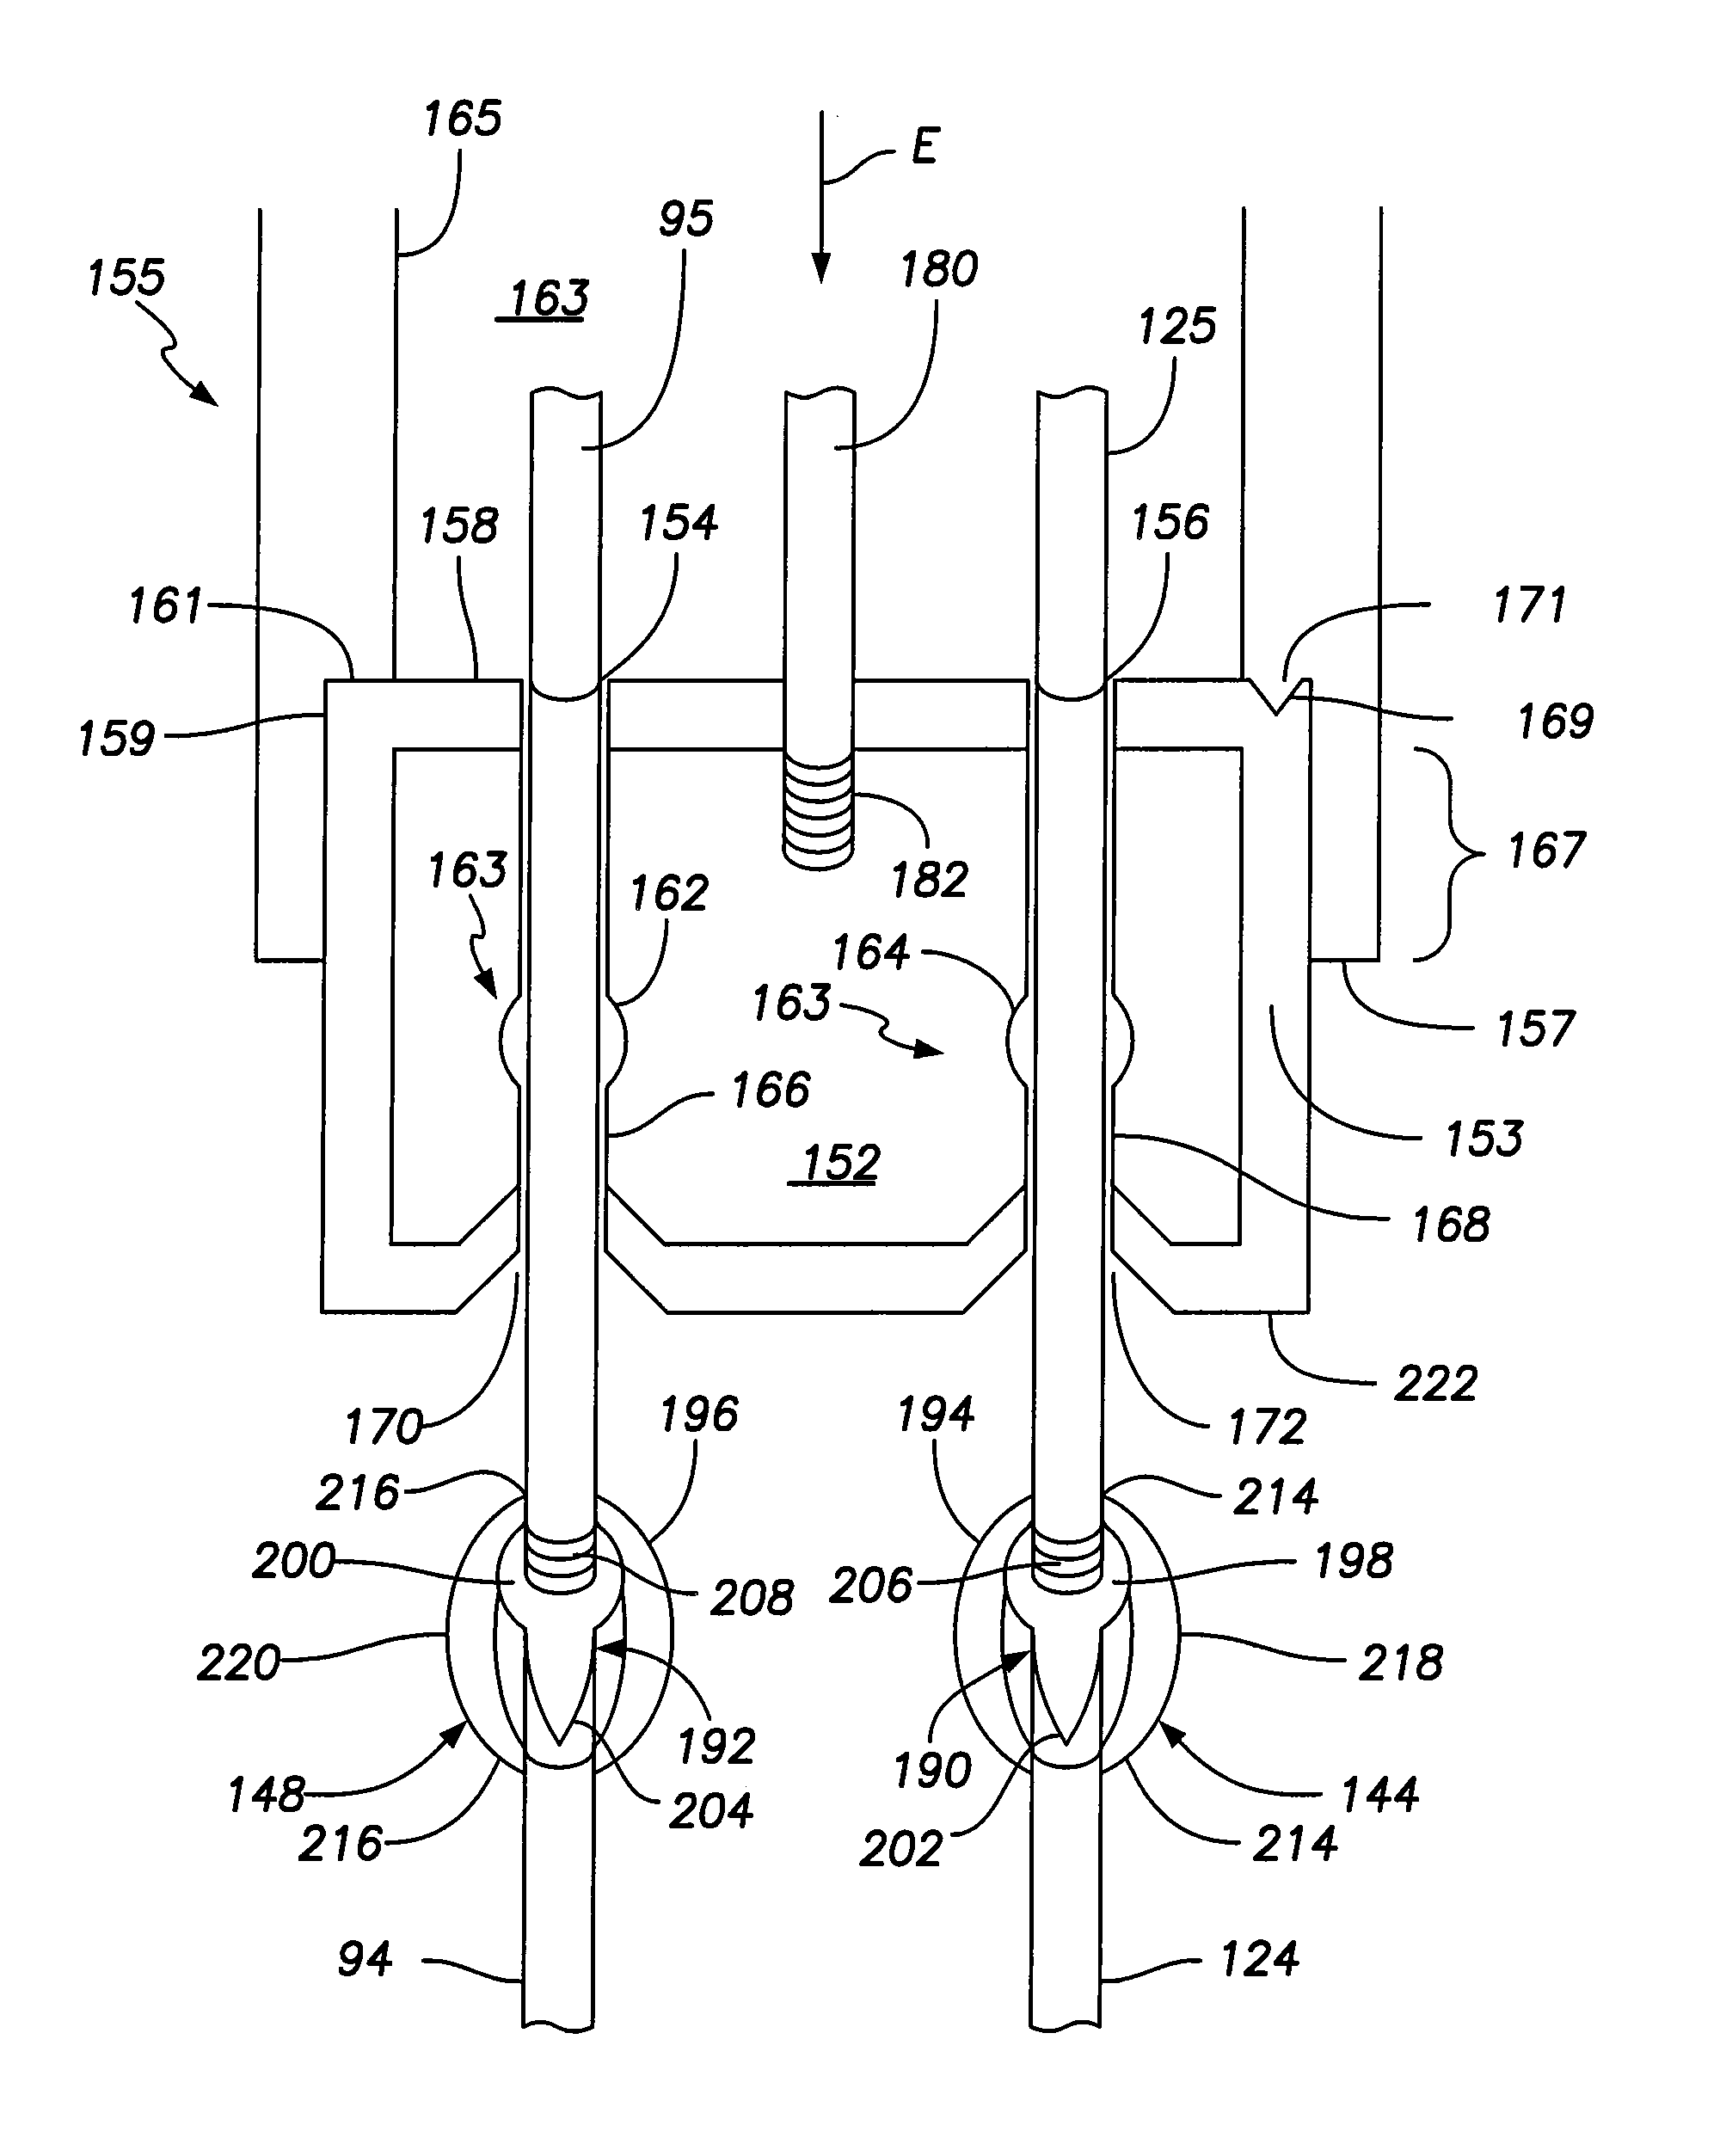 Multi-piece dual-chamber leadless intra-cardiac medical device and method of implanting same